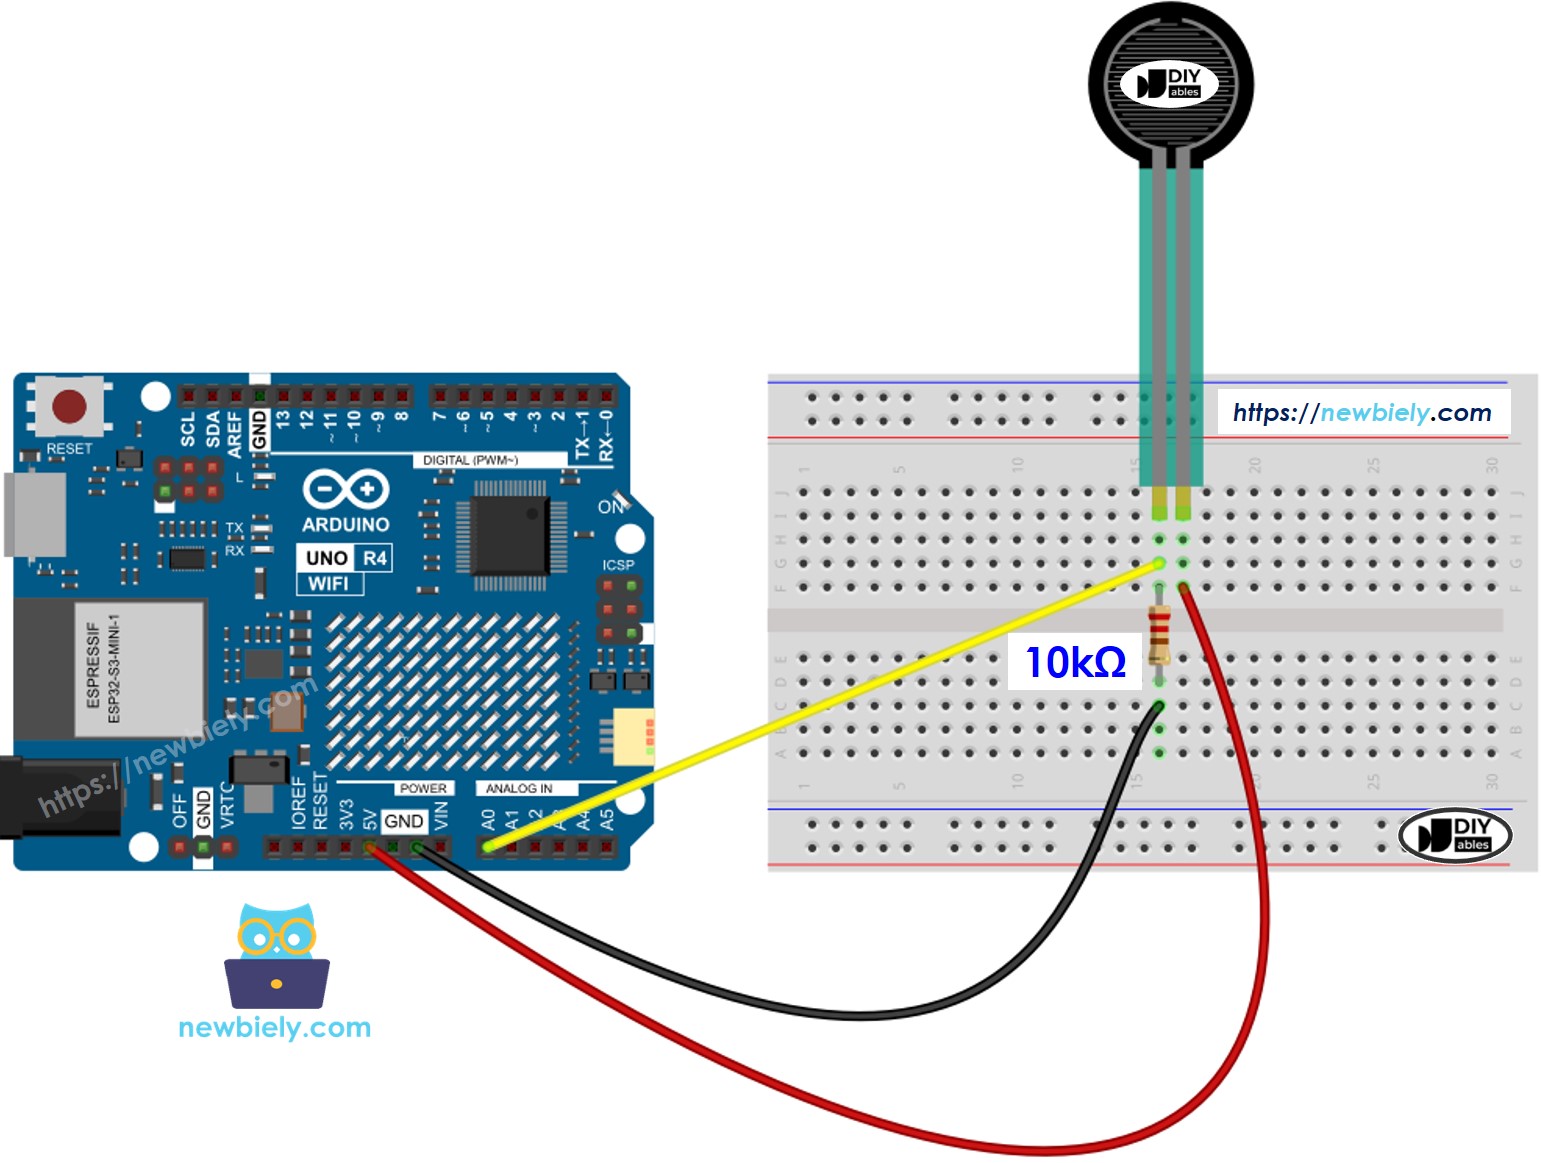 The wiring diagram between Arduino UNO R4 Force